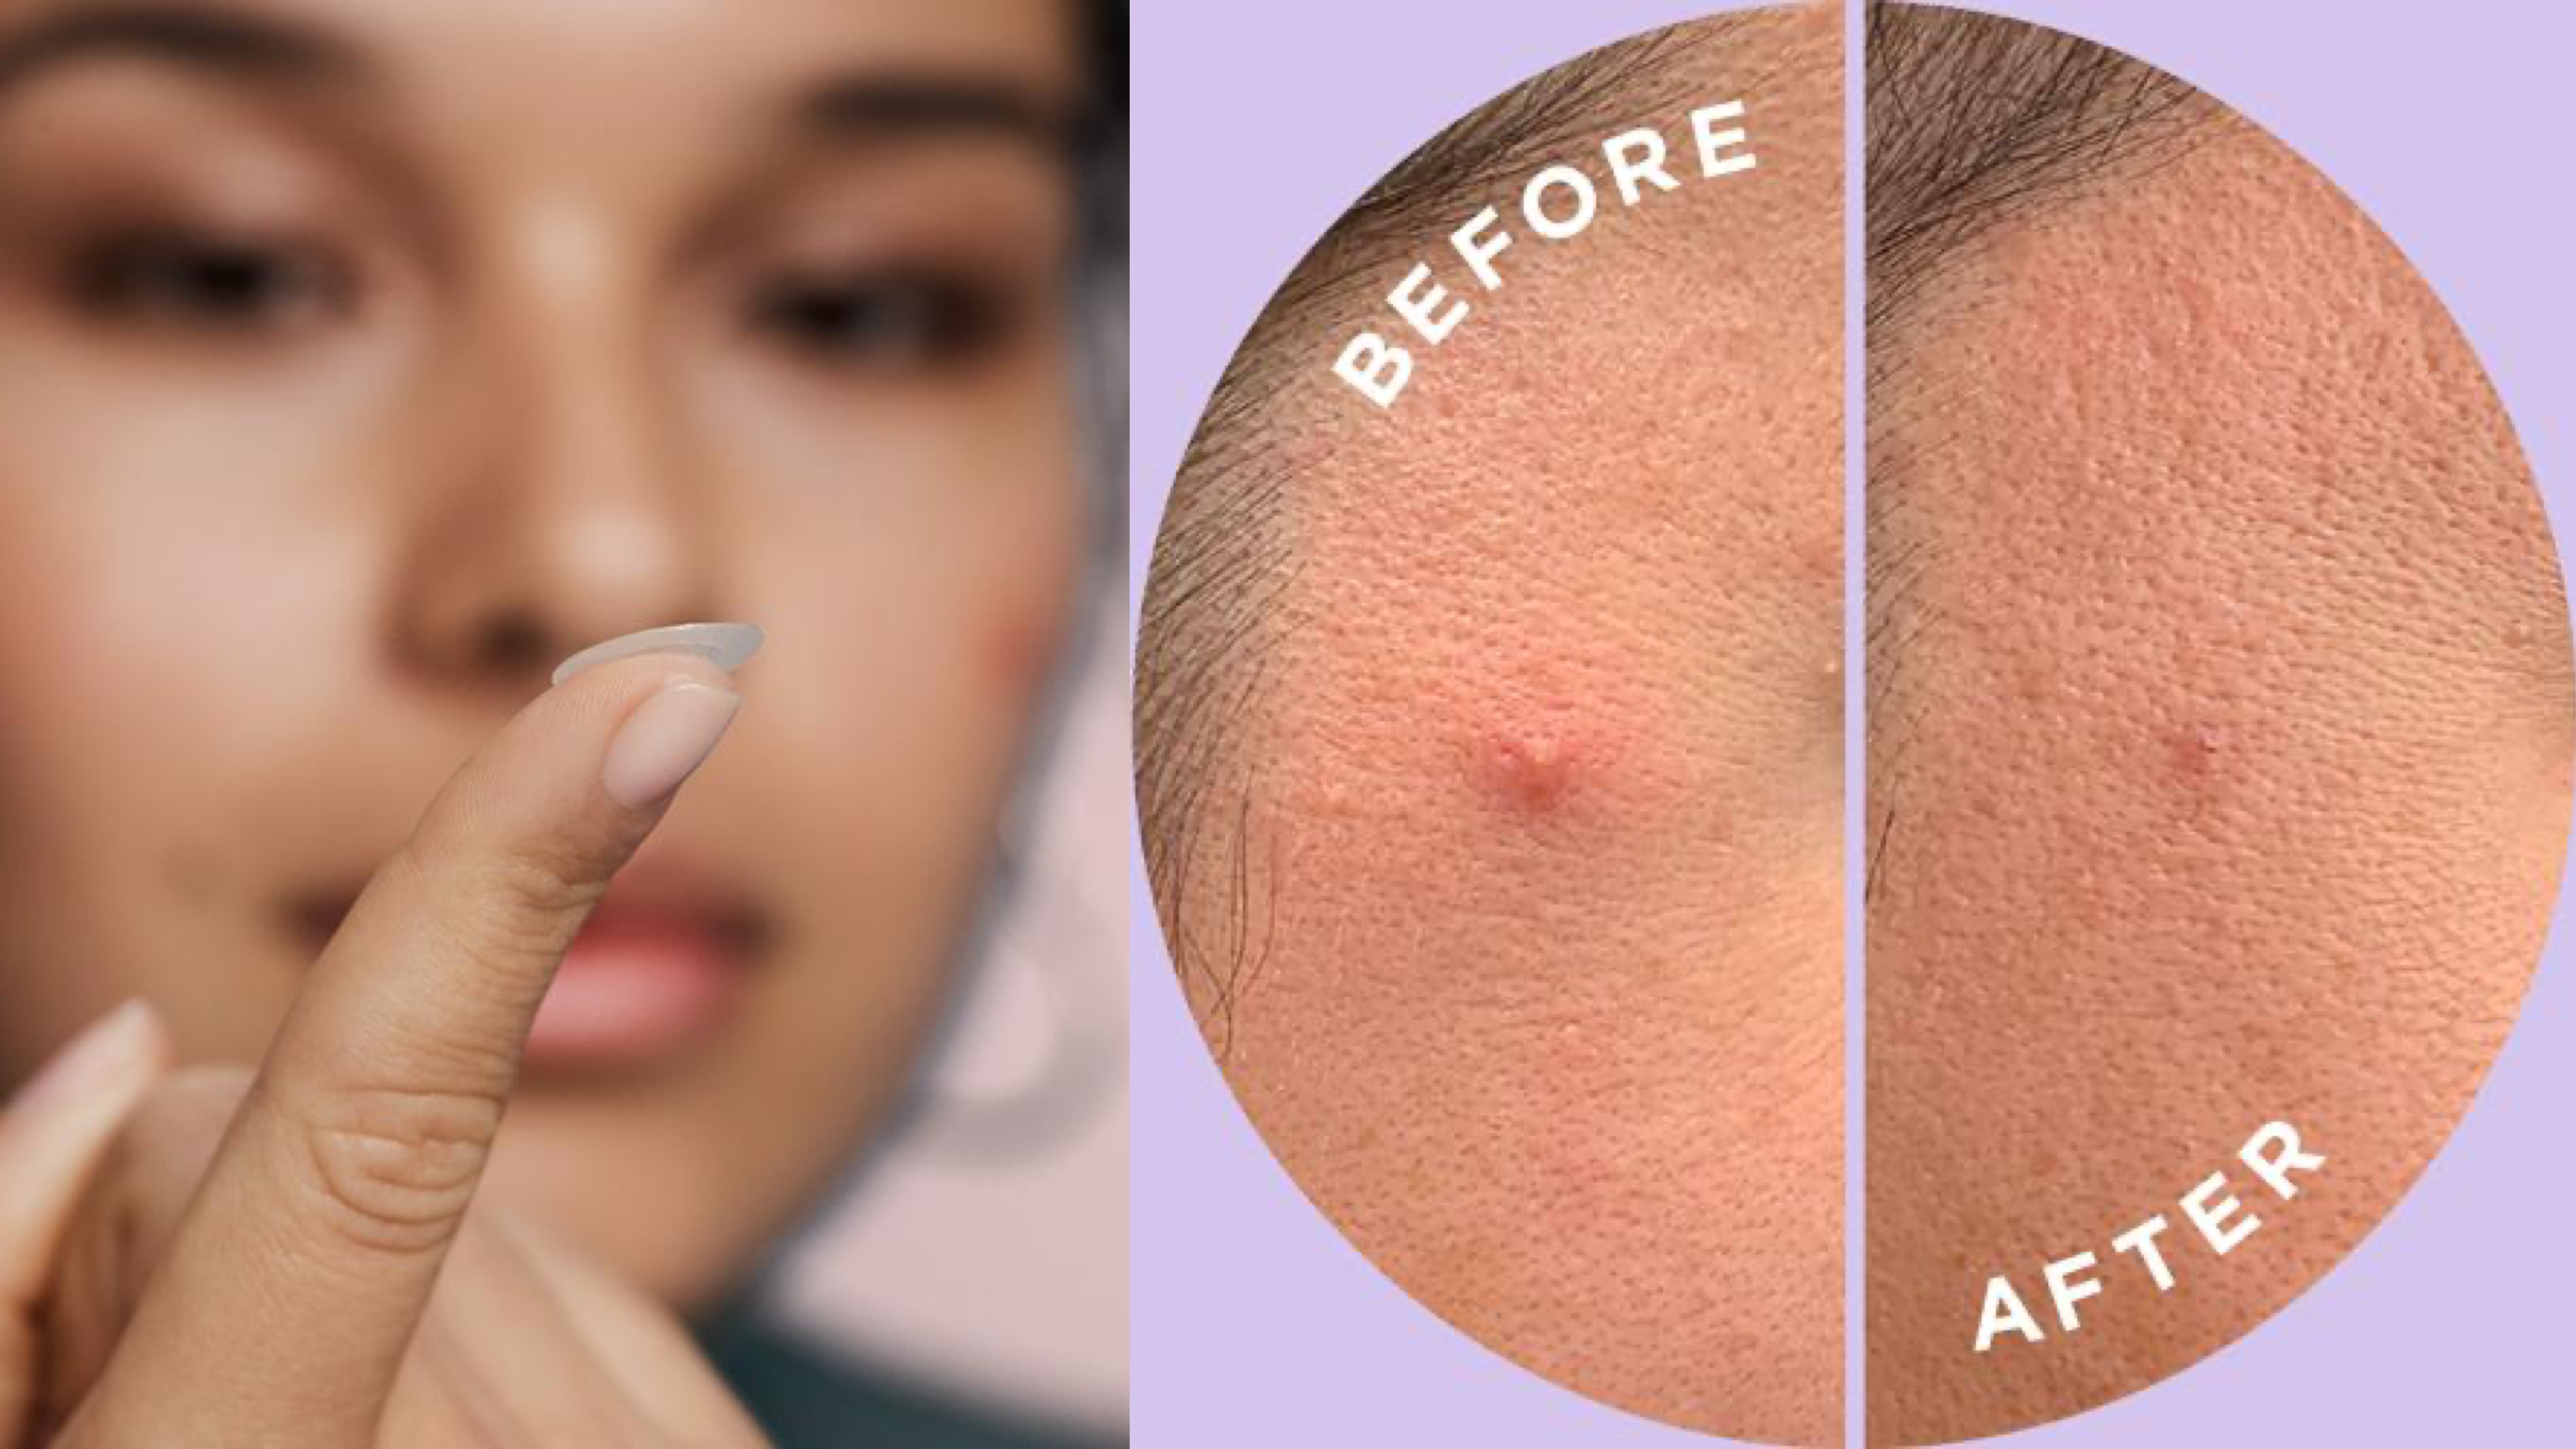 pimple patches to help heal breakouts